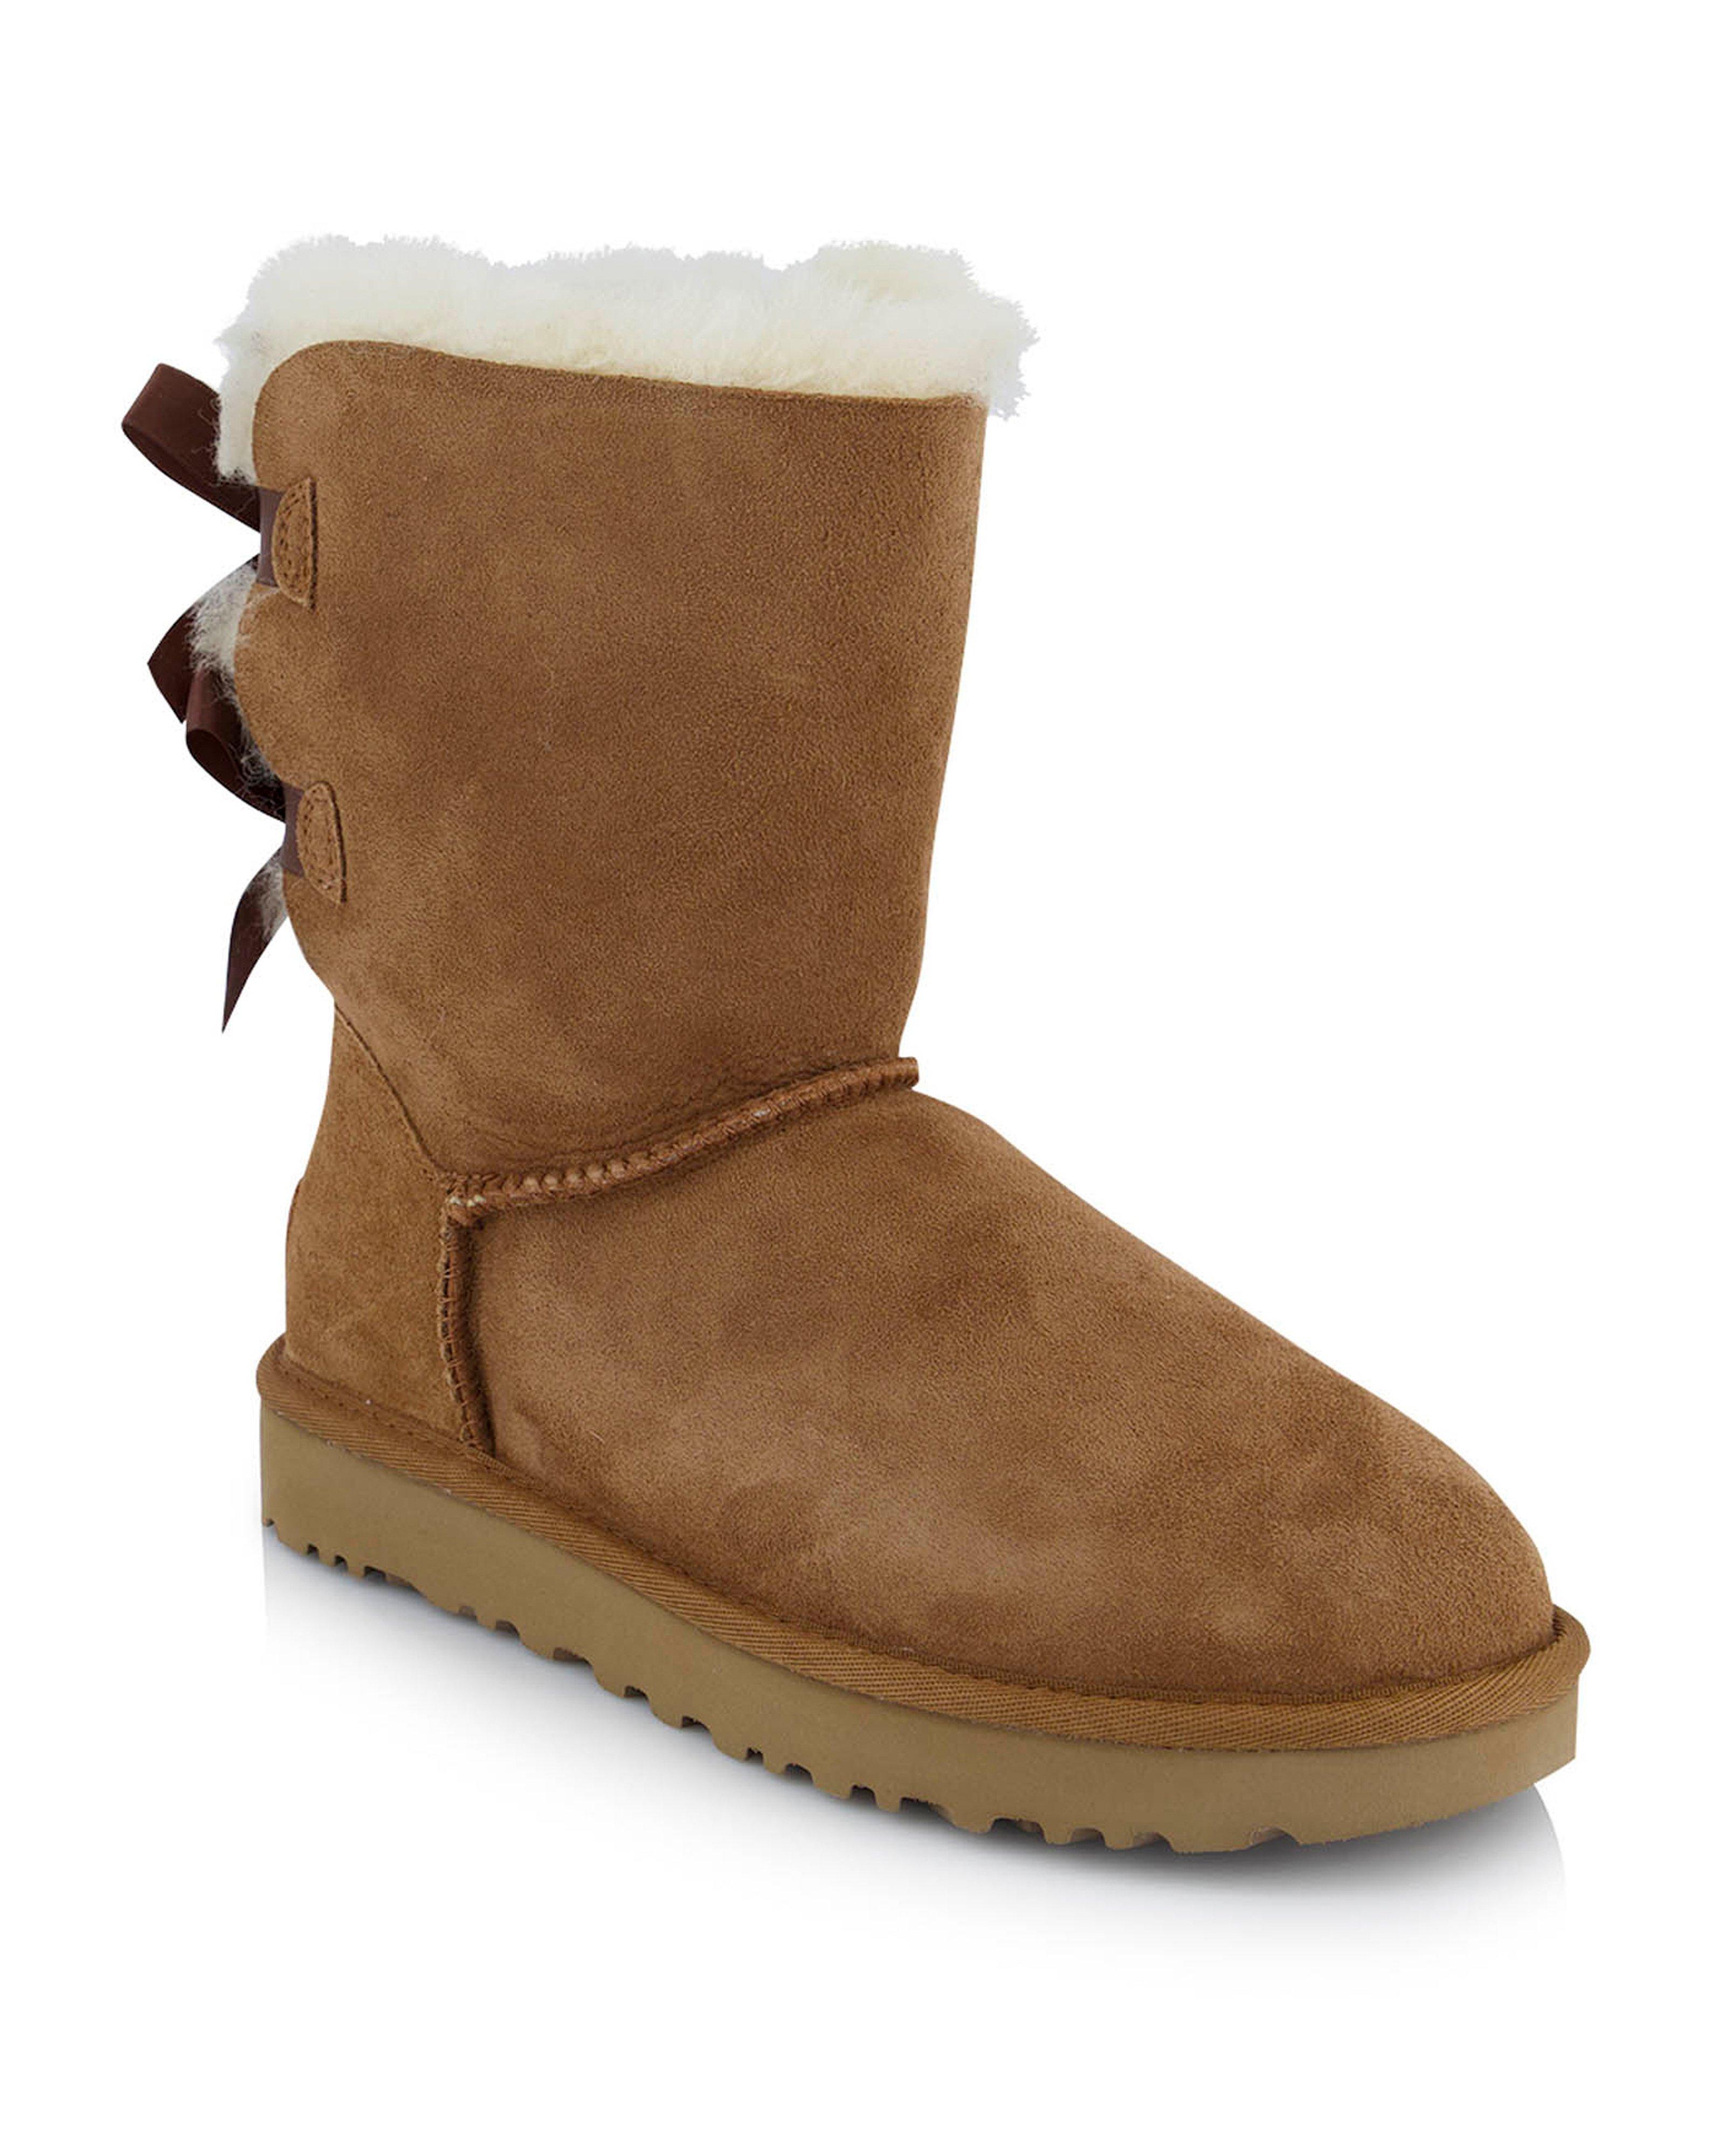 Restricción Audaz Antídoto Ugg Bailey Bow II Boot Ladies - Poetry Clothing Store